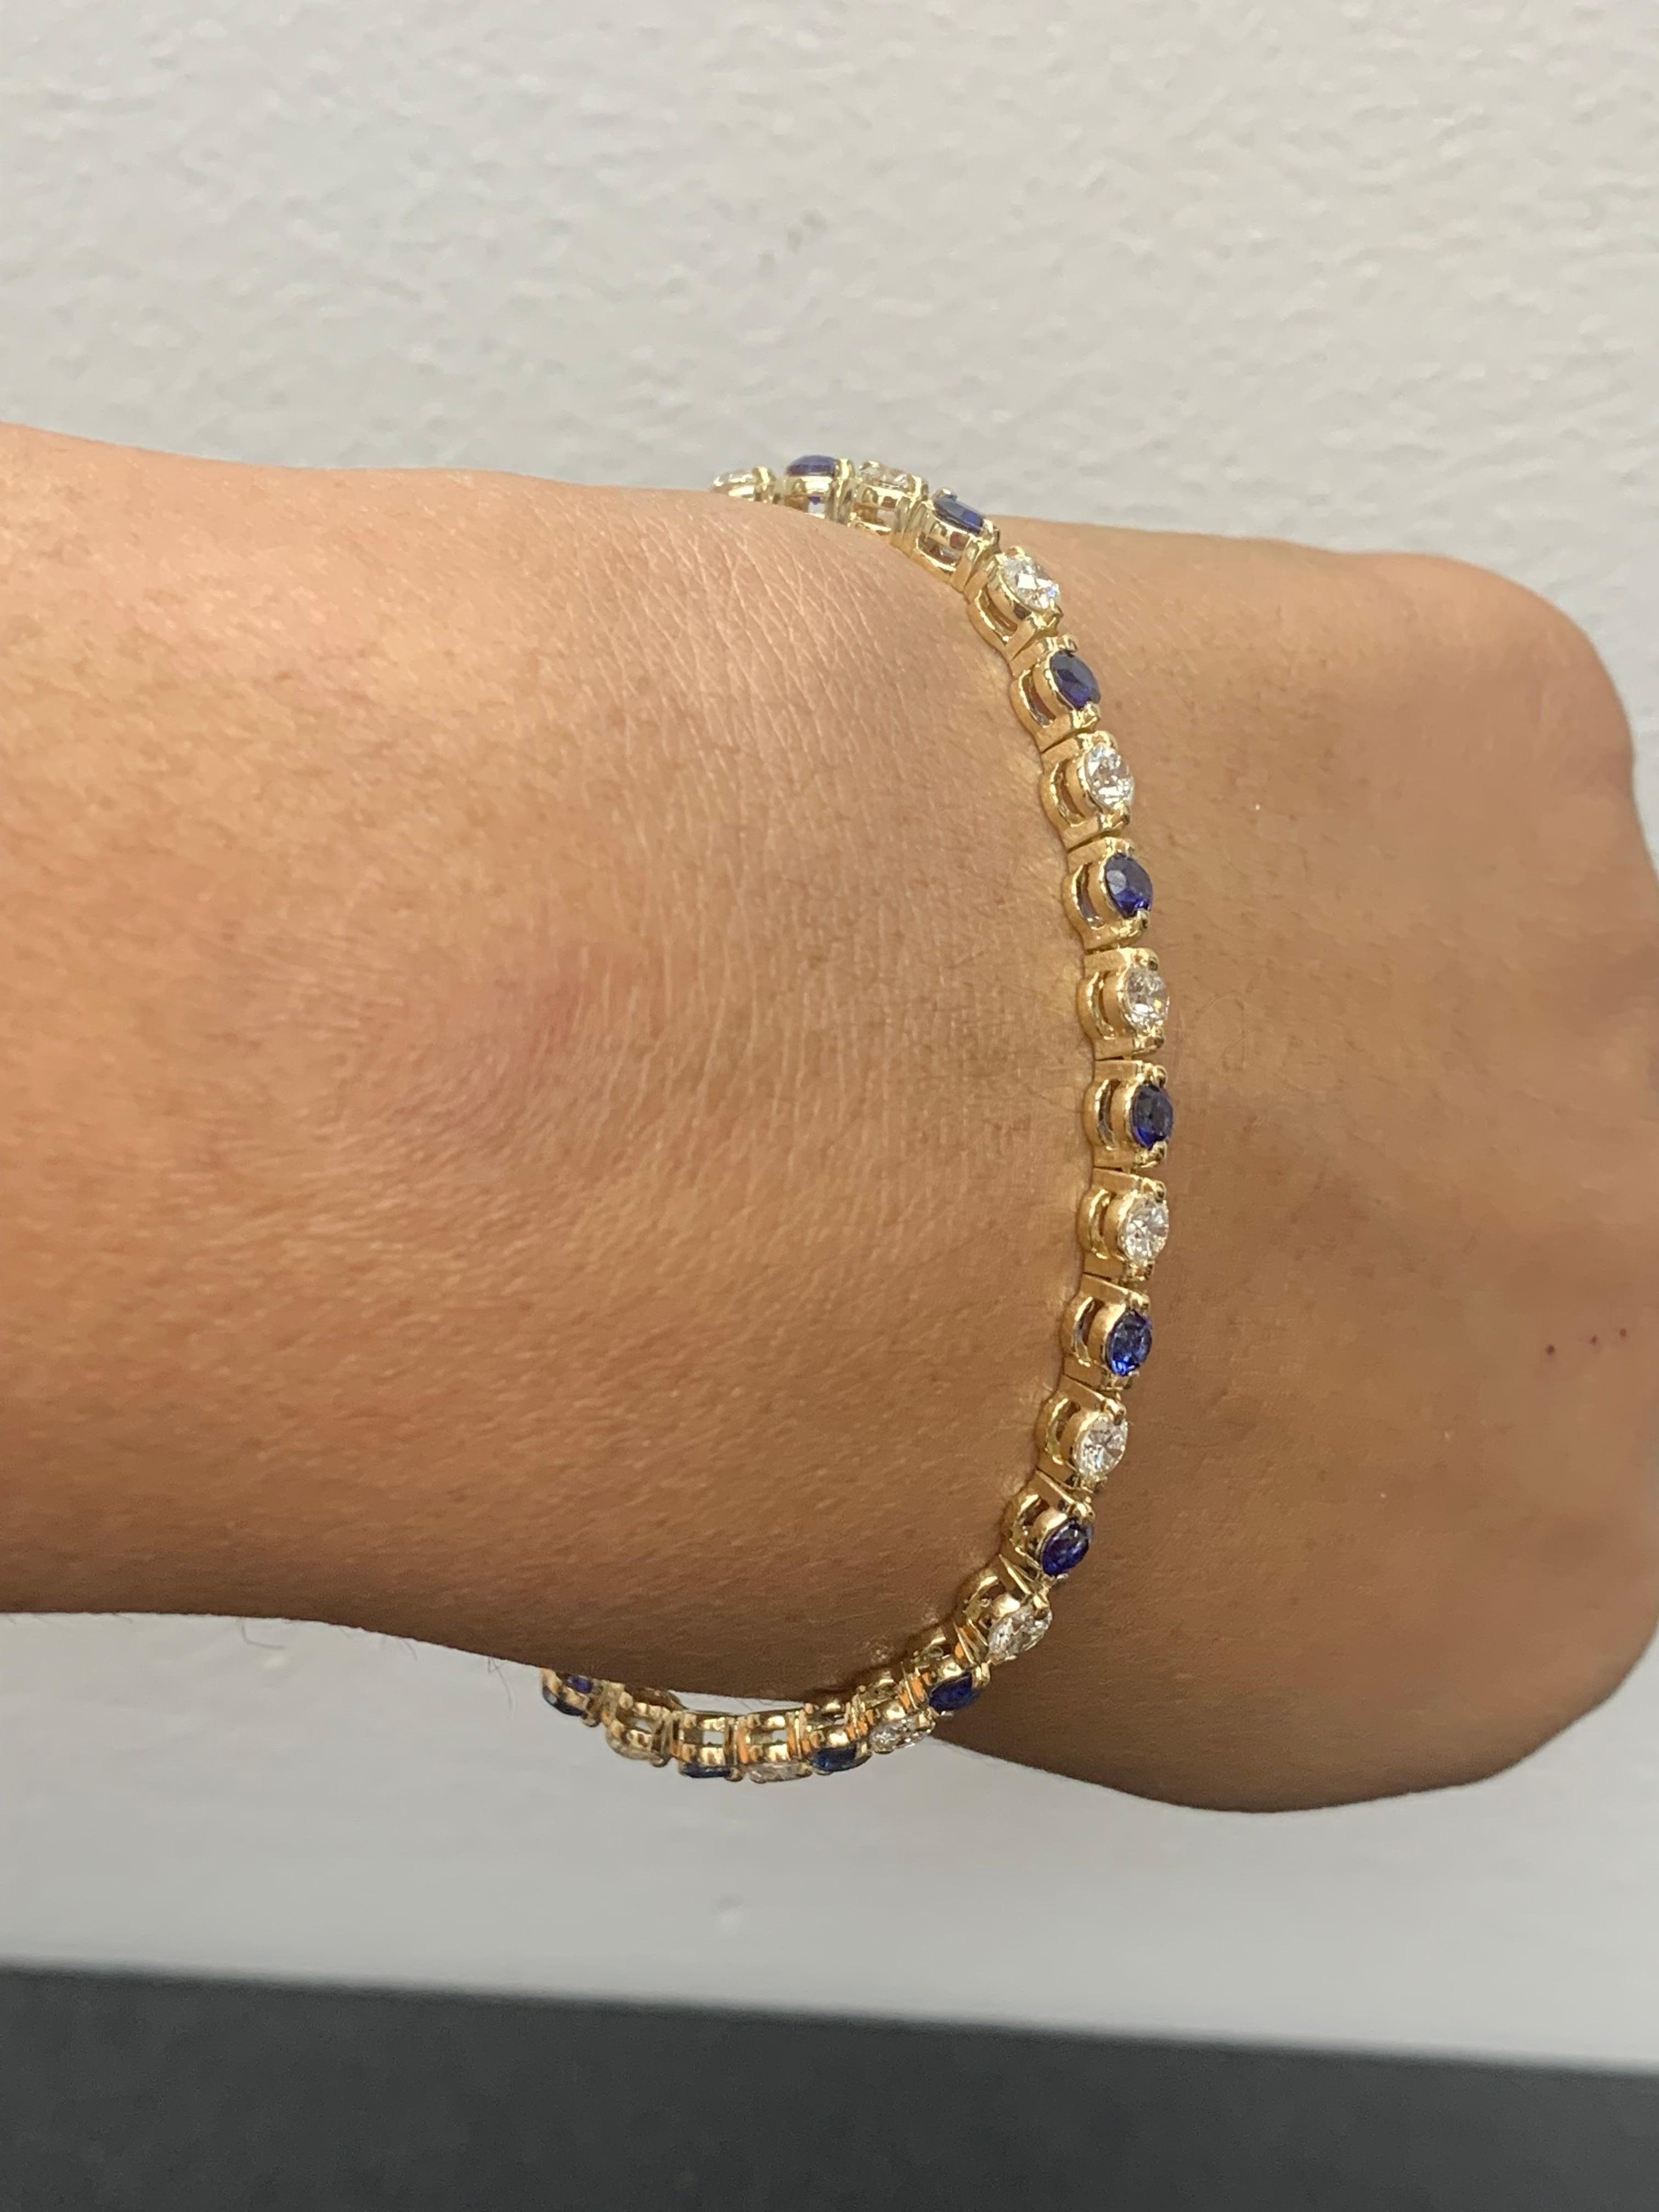 Round Cut 3.18 Carat Round Blue Sapphire and Diamond Bracelet in 14K Yellow Gold For Sale